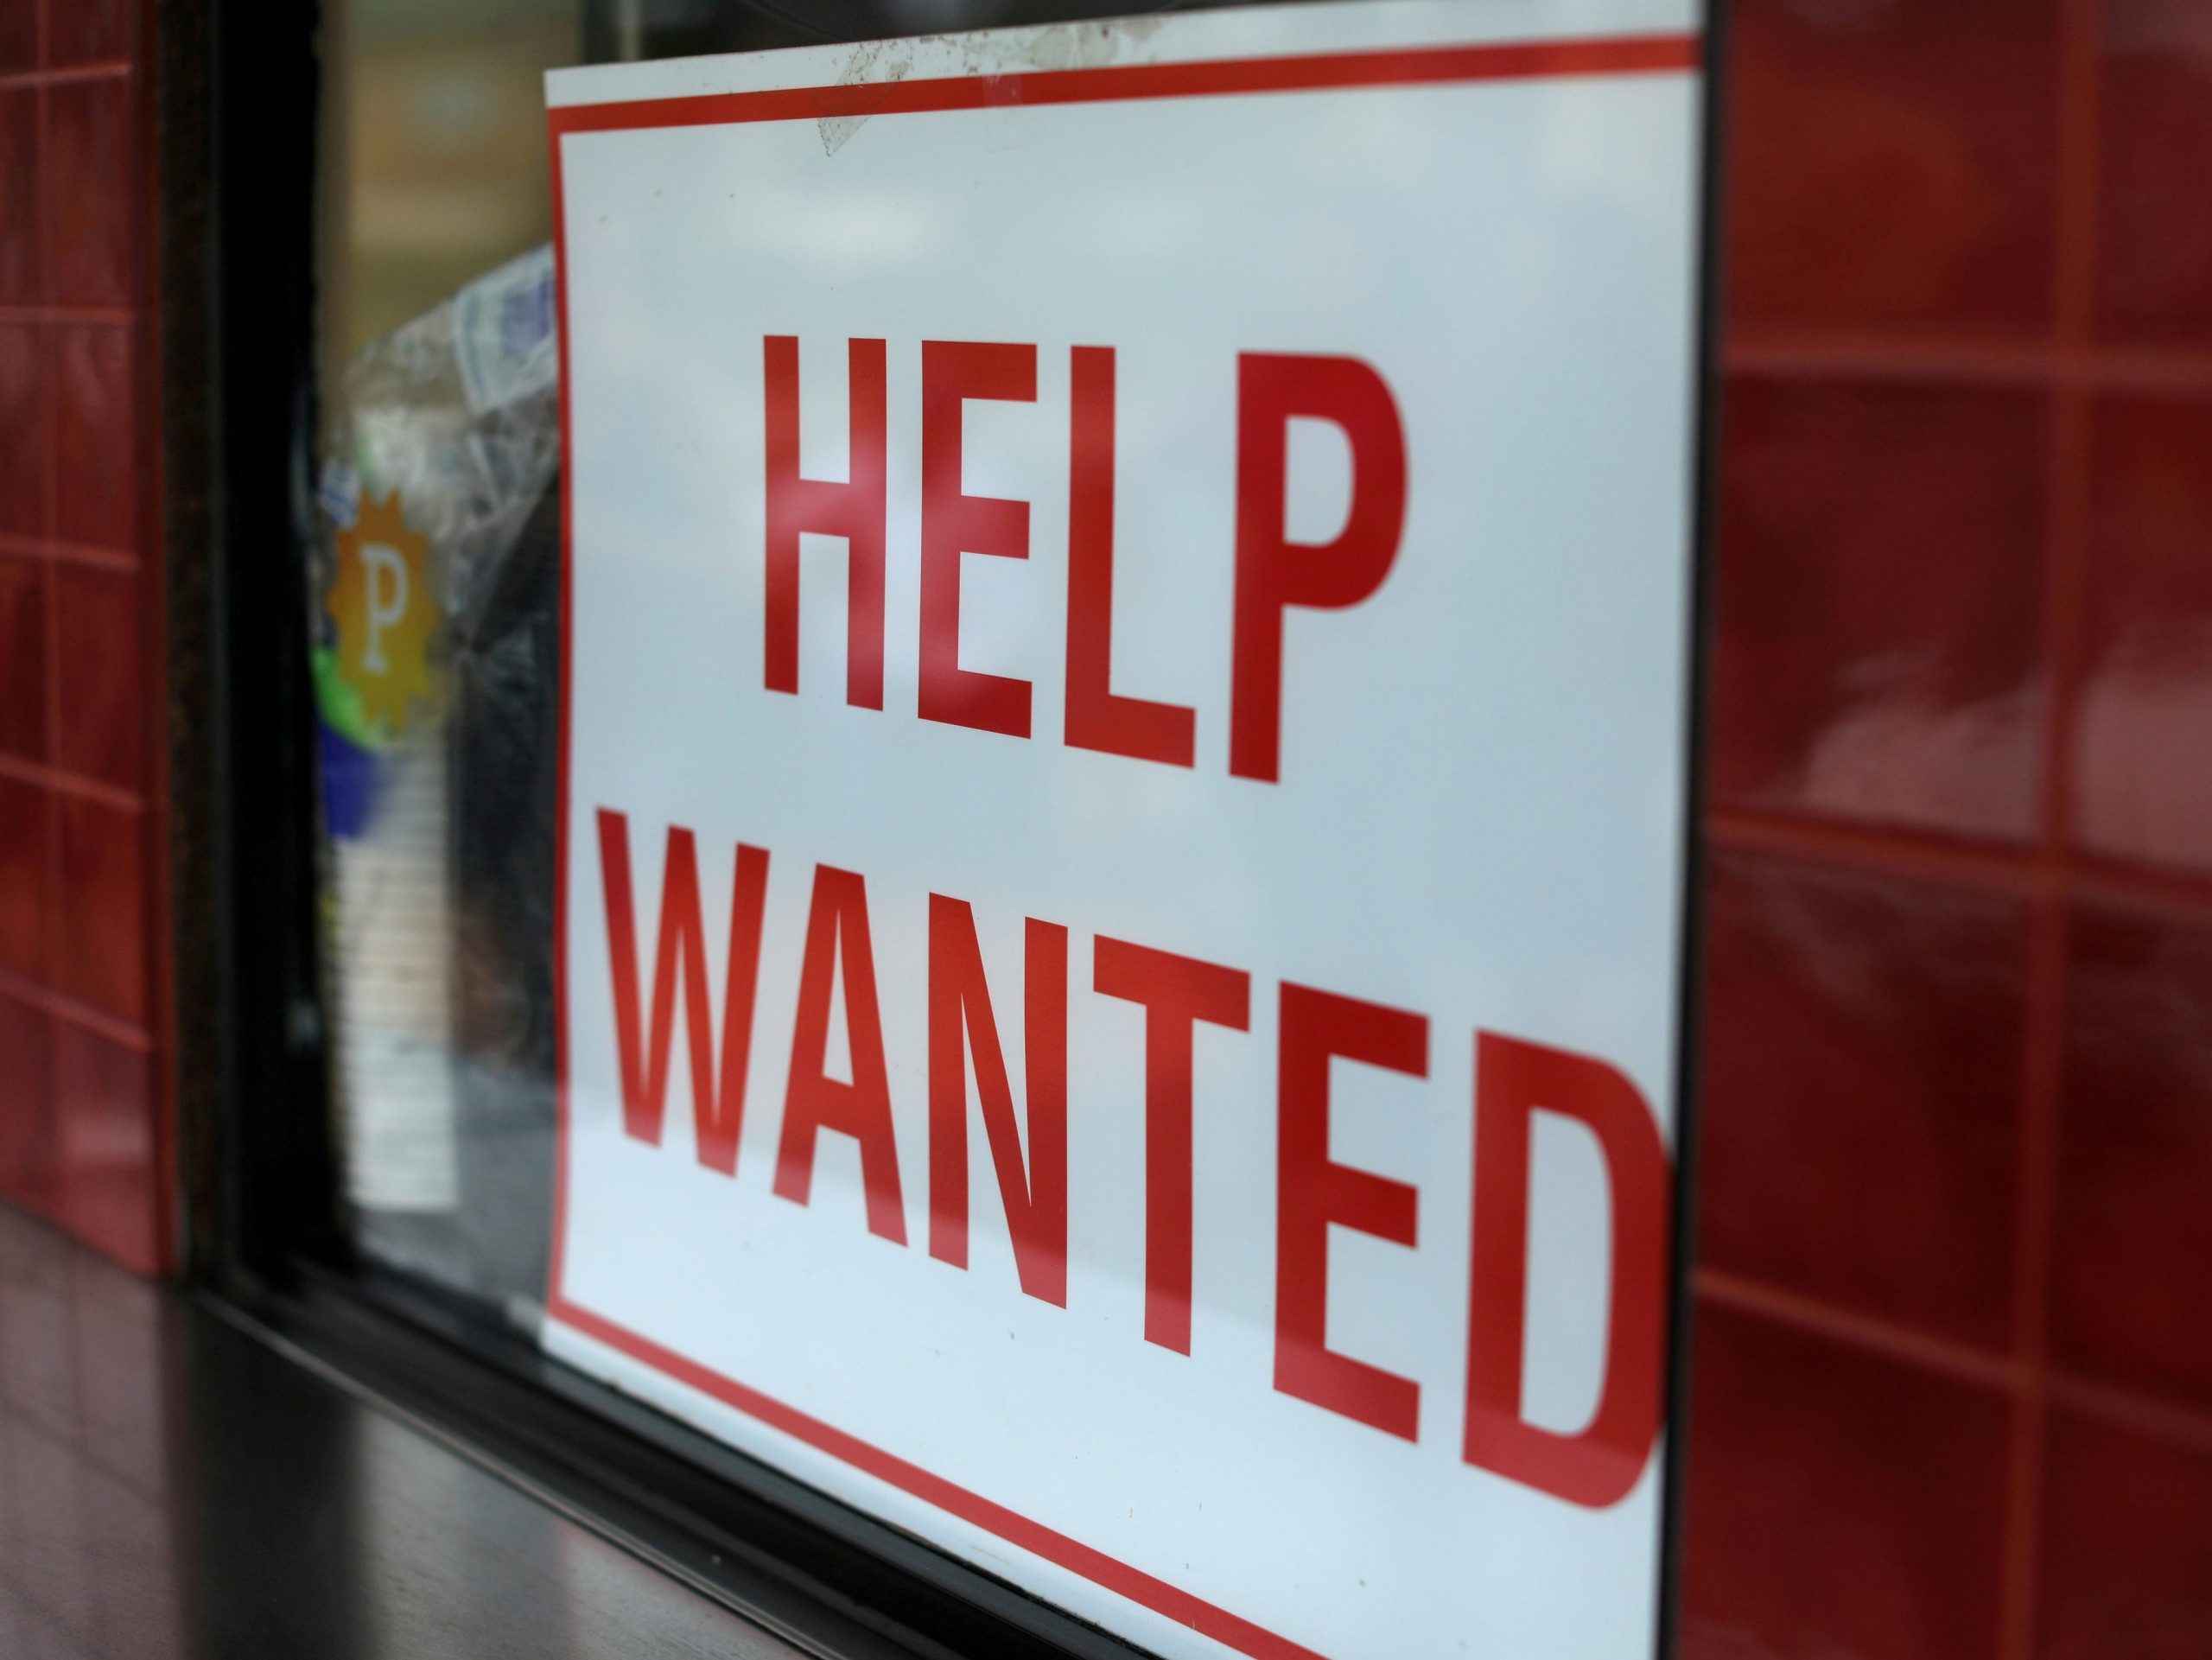 A "Help Wanted" sign is displayed in a window.